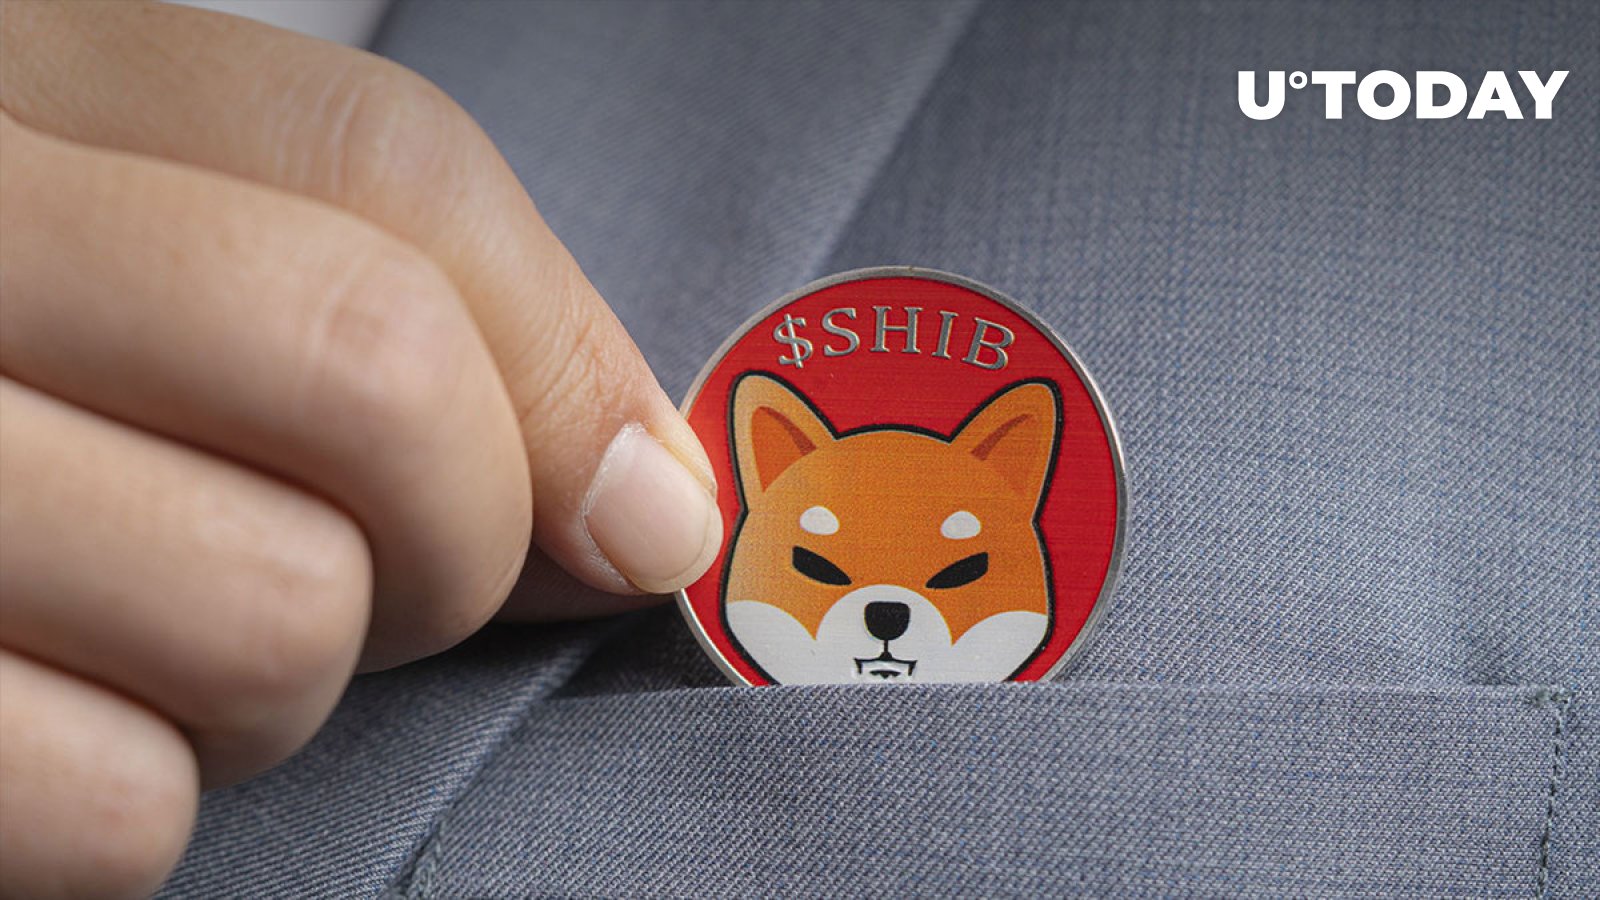 Only 0.7% of Shiba Inu (SHIB) Holders Are Billionaires